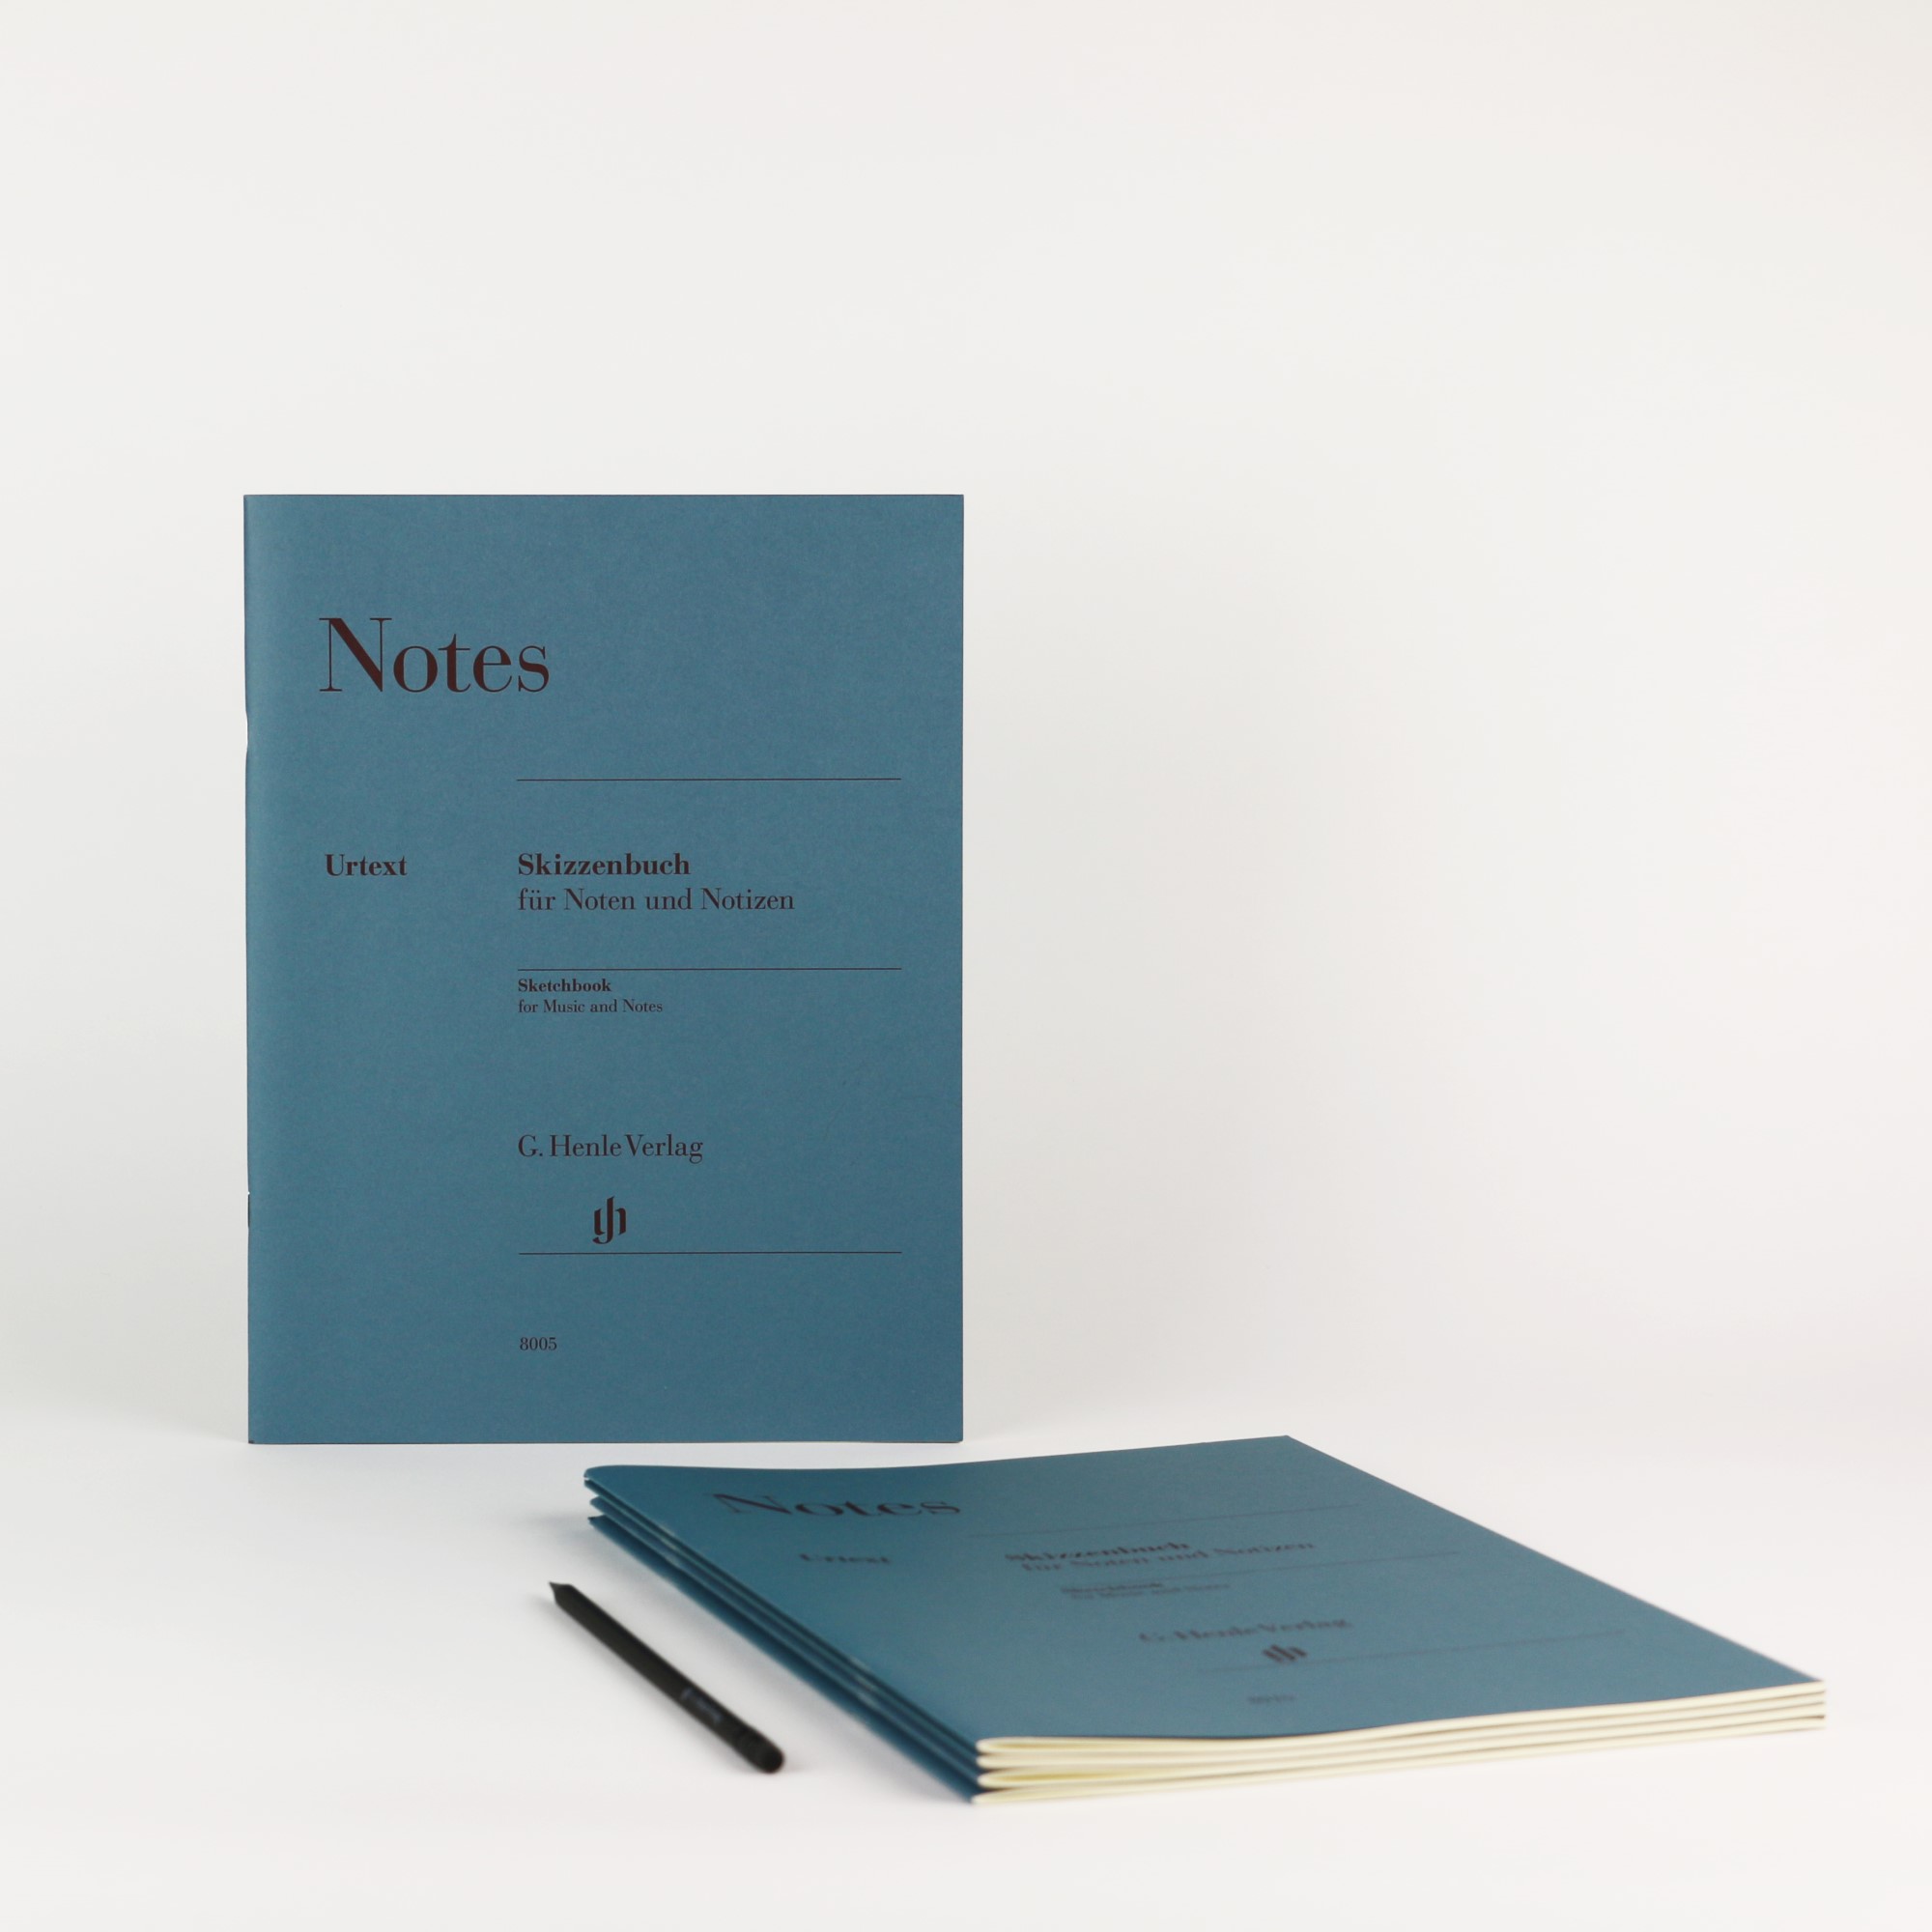 Sketchbook for music and notes